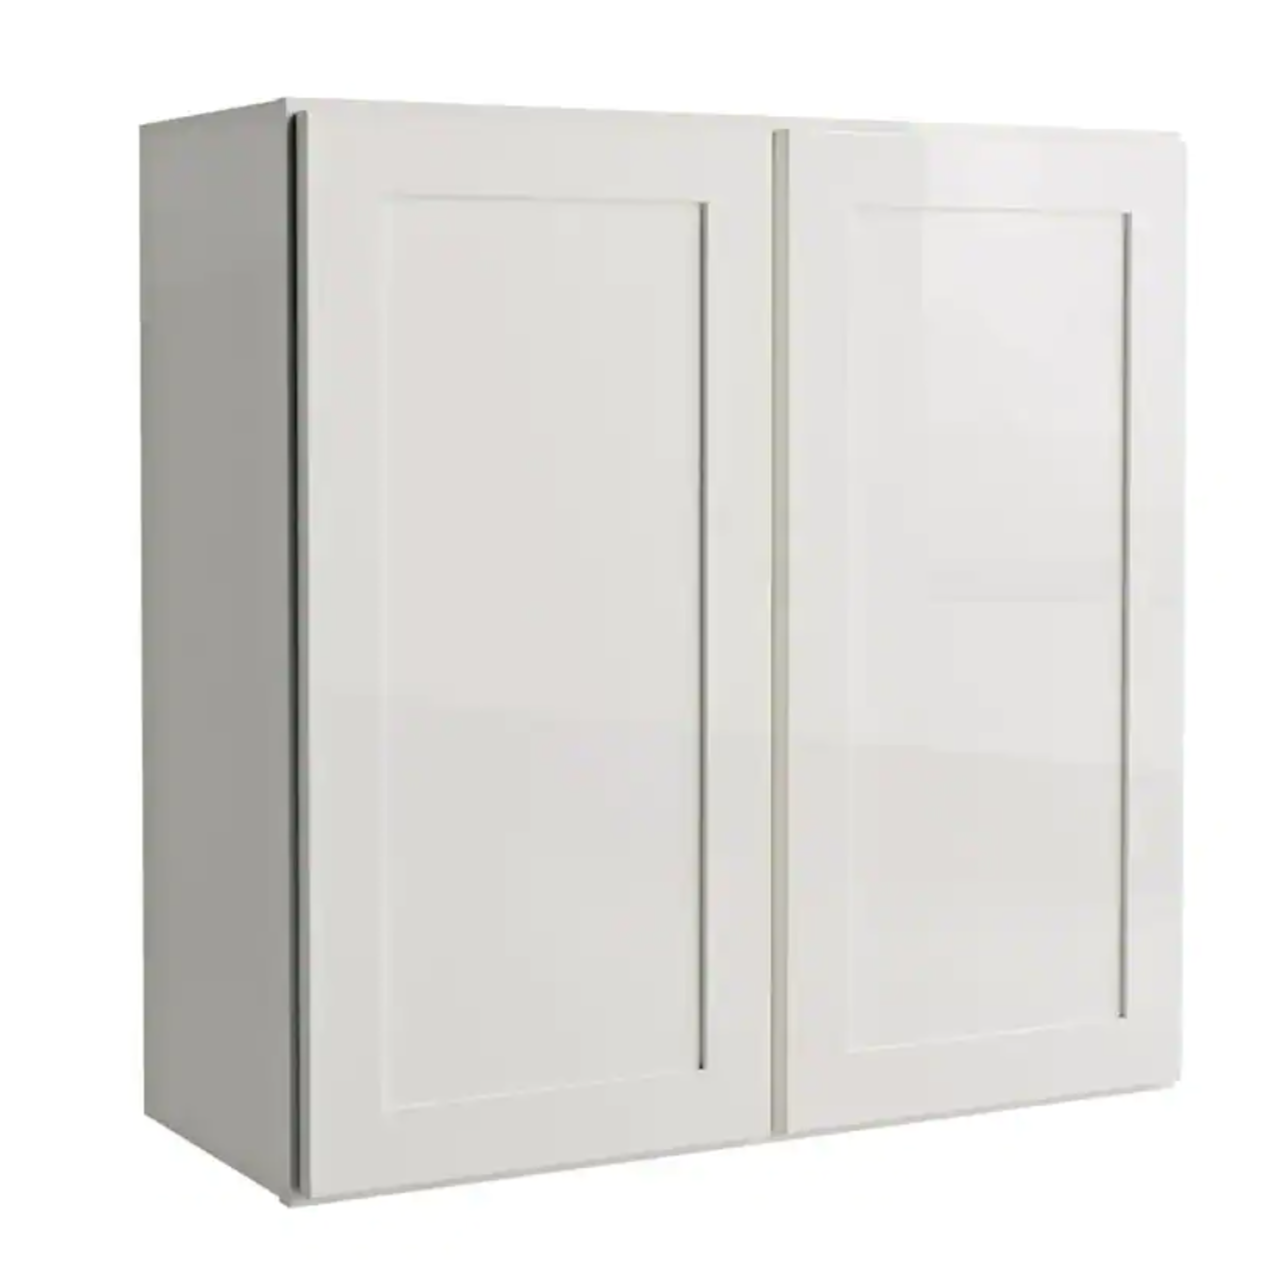 Courtland 30 in. W x 12 in. D x 30 in. H Assembled Shaker Wall Kitchen Cabinet in Polar White